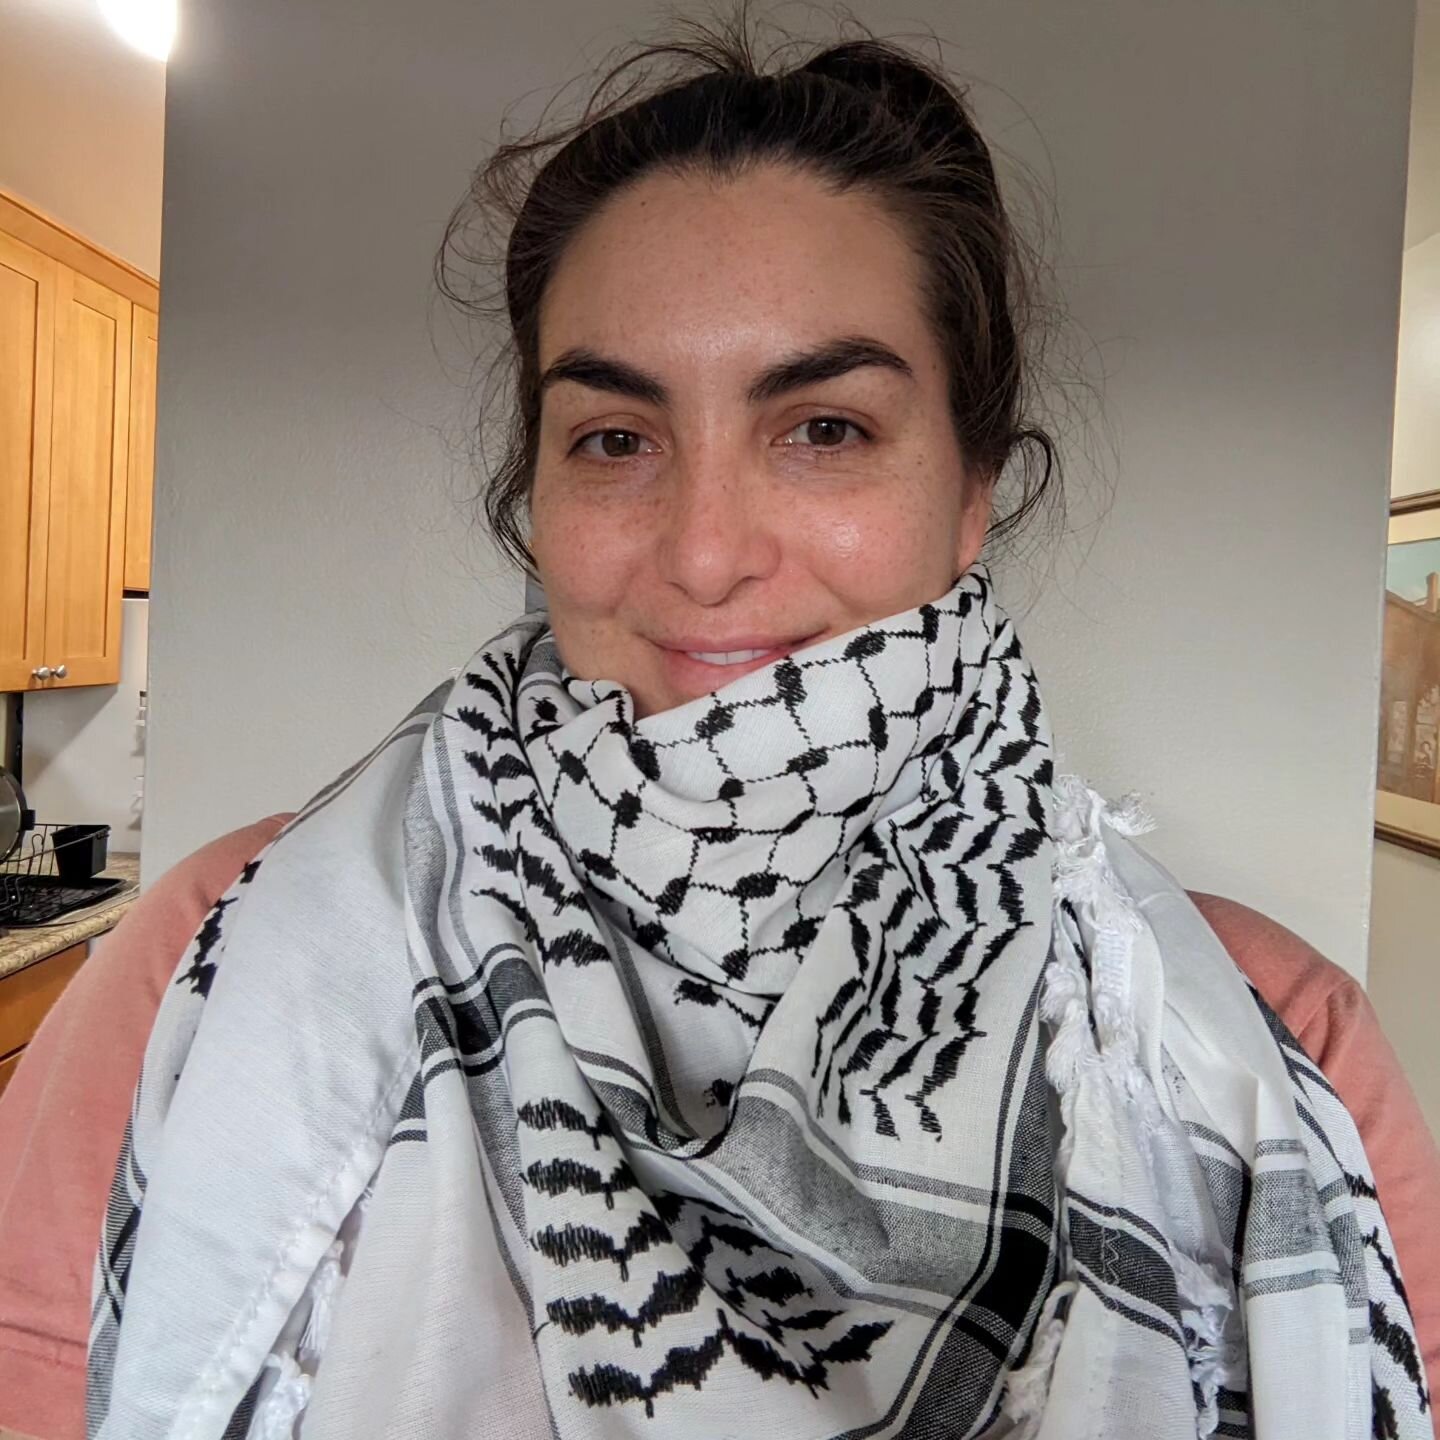 I don't usually post selfies, but I had to share that my gorgeous kufiyeh arrived from @hirbawi 💖🇵🇸

Their website is under maintenance right now because they've been getting so many orders, but check back regularly. My order arrived in 2 weeks 💖